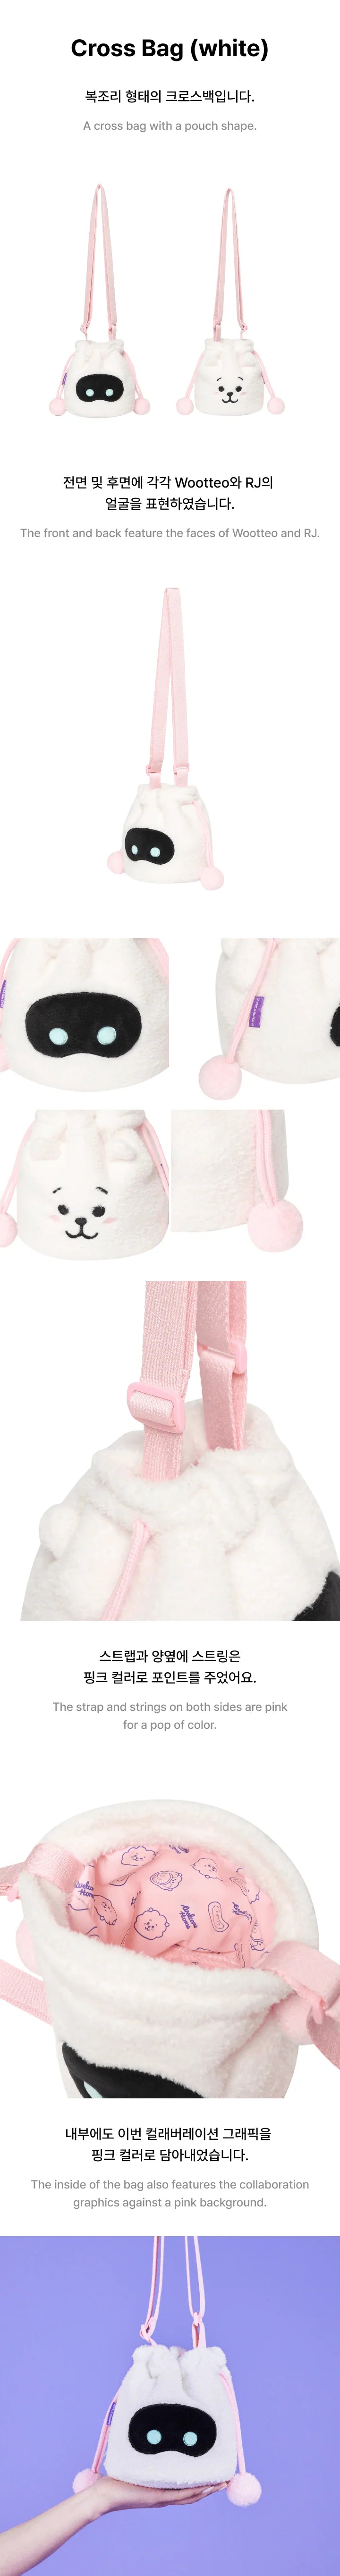 [PRE ORDER] WOOTEO X RJ Collaboration (Official MD) CROSS BAG